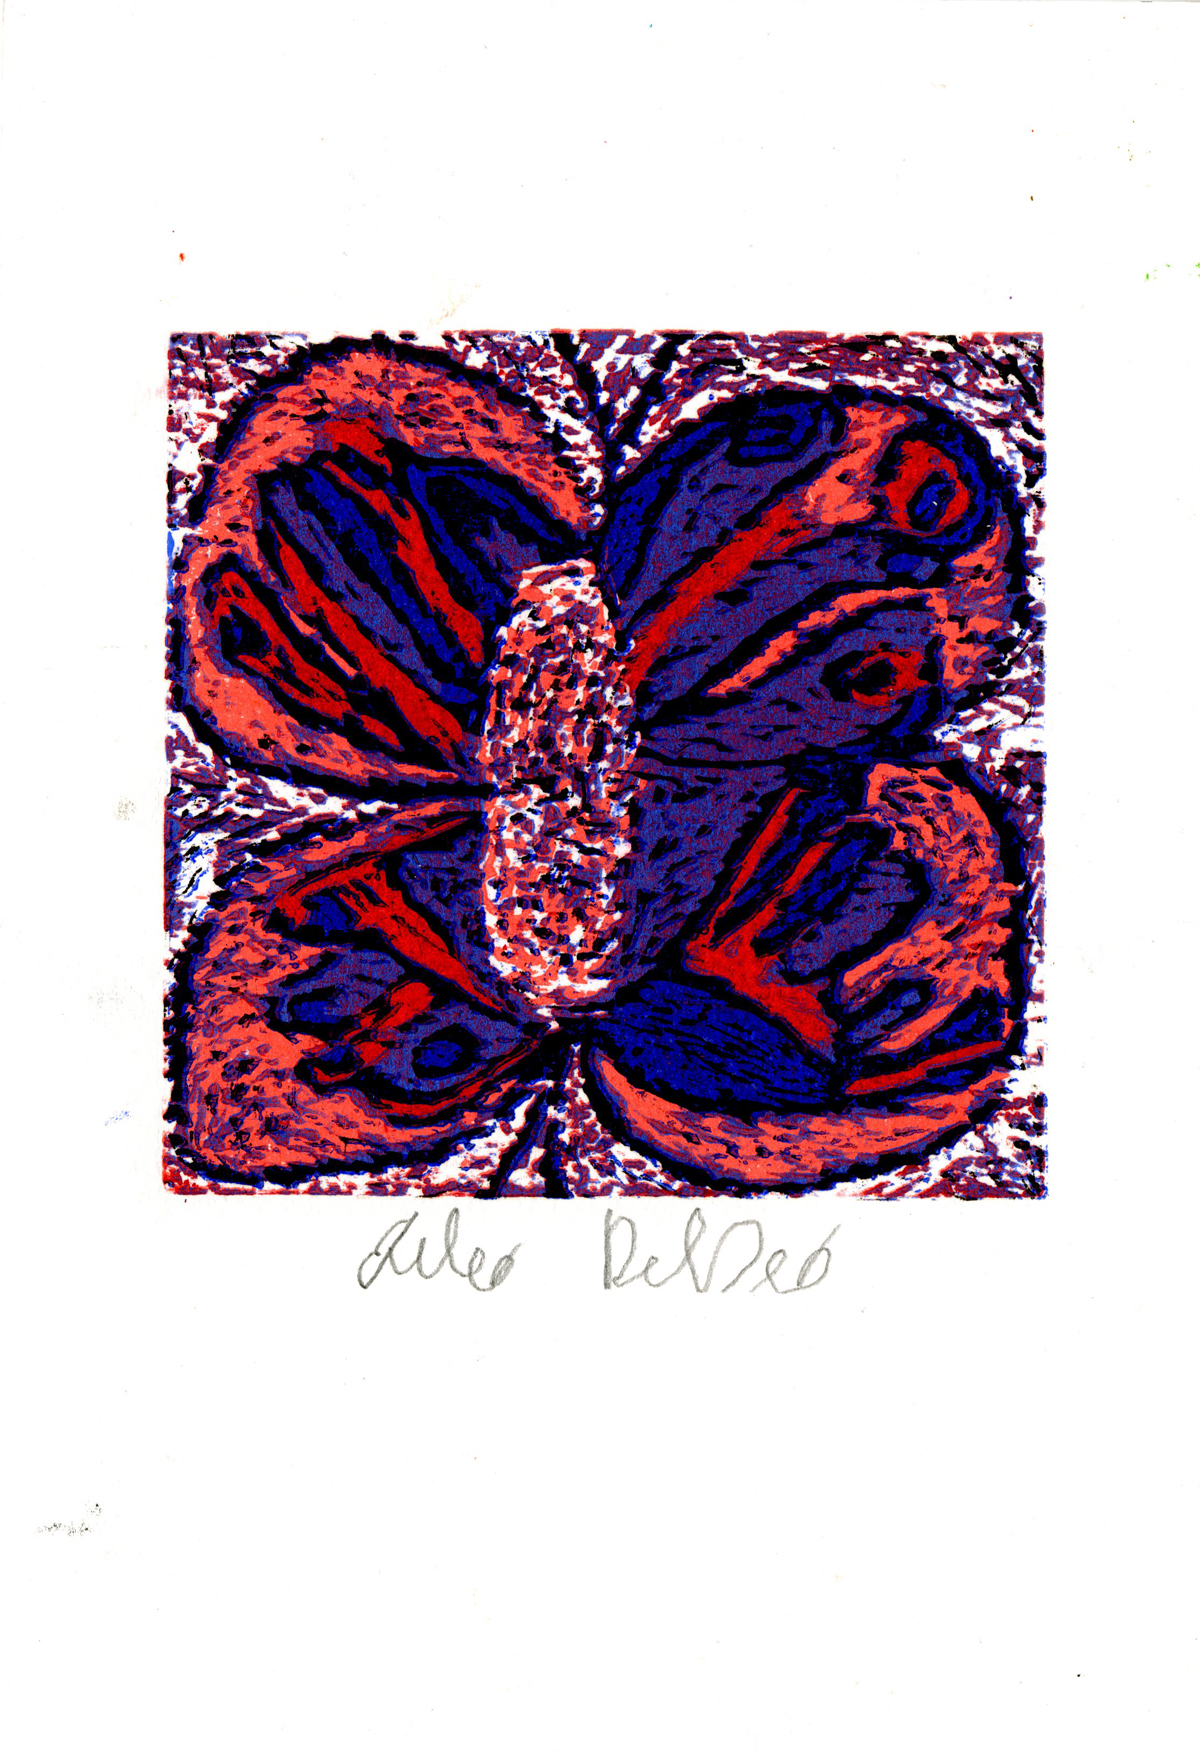 colorful print of a butterfly that fills an entire square